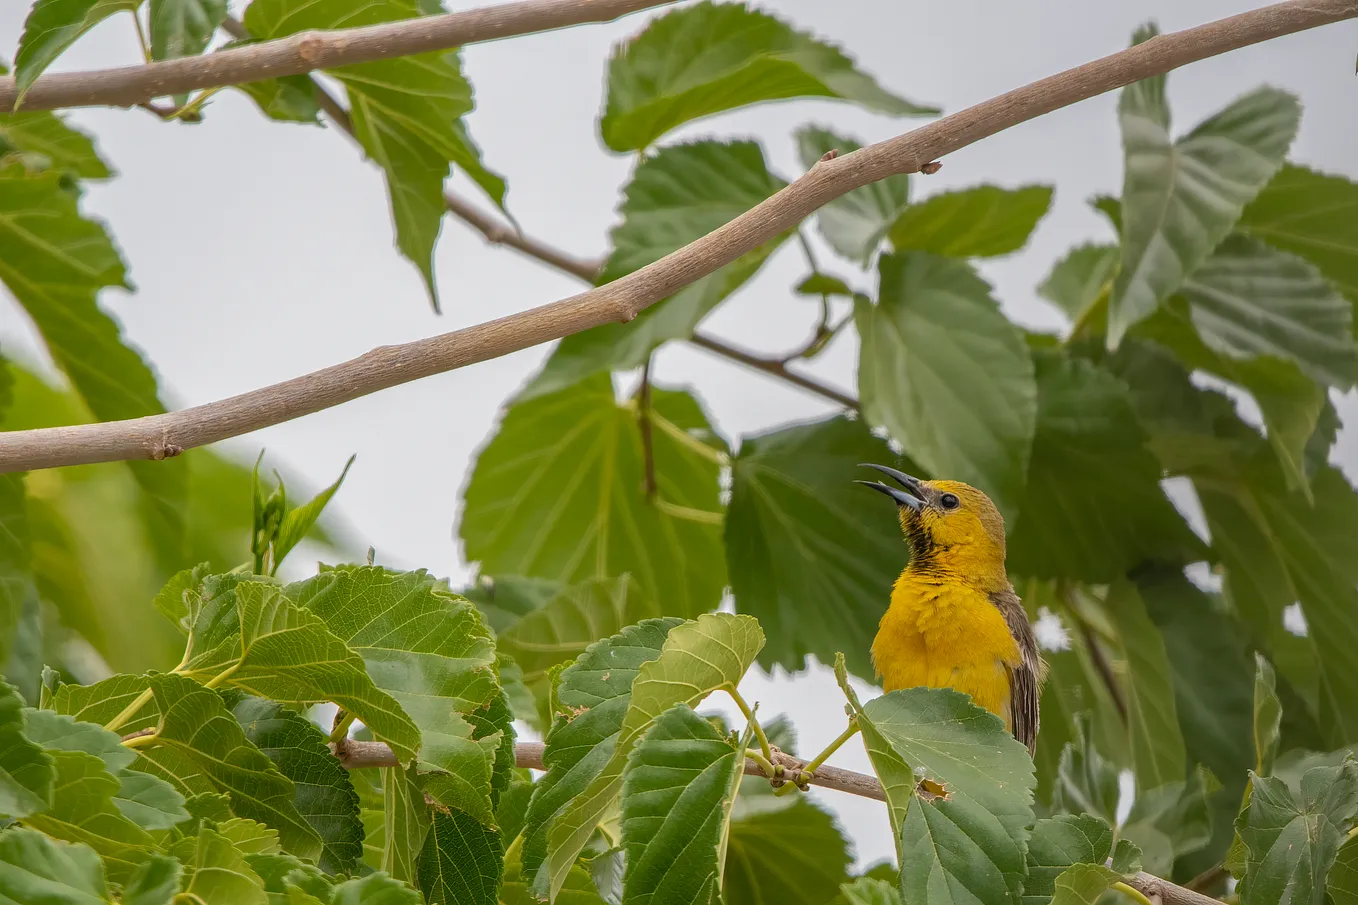 A yellow oriole with its mouth open perched in a tree with green leaves